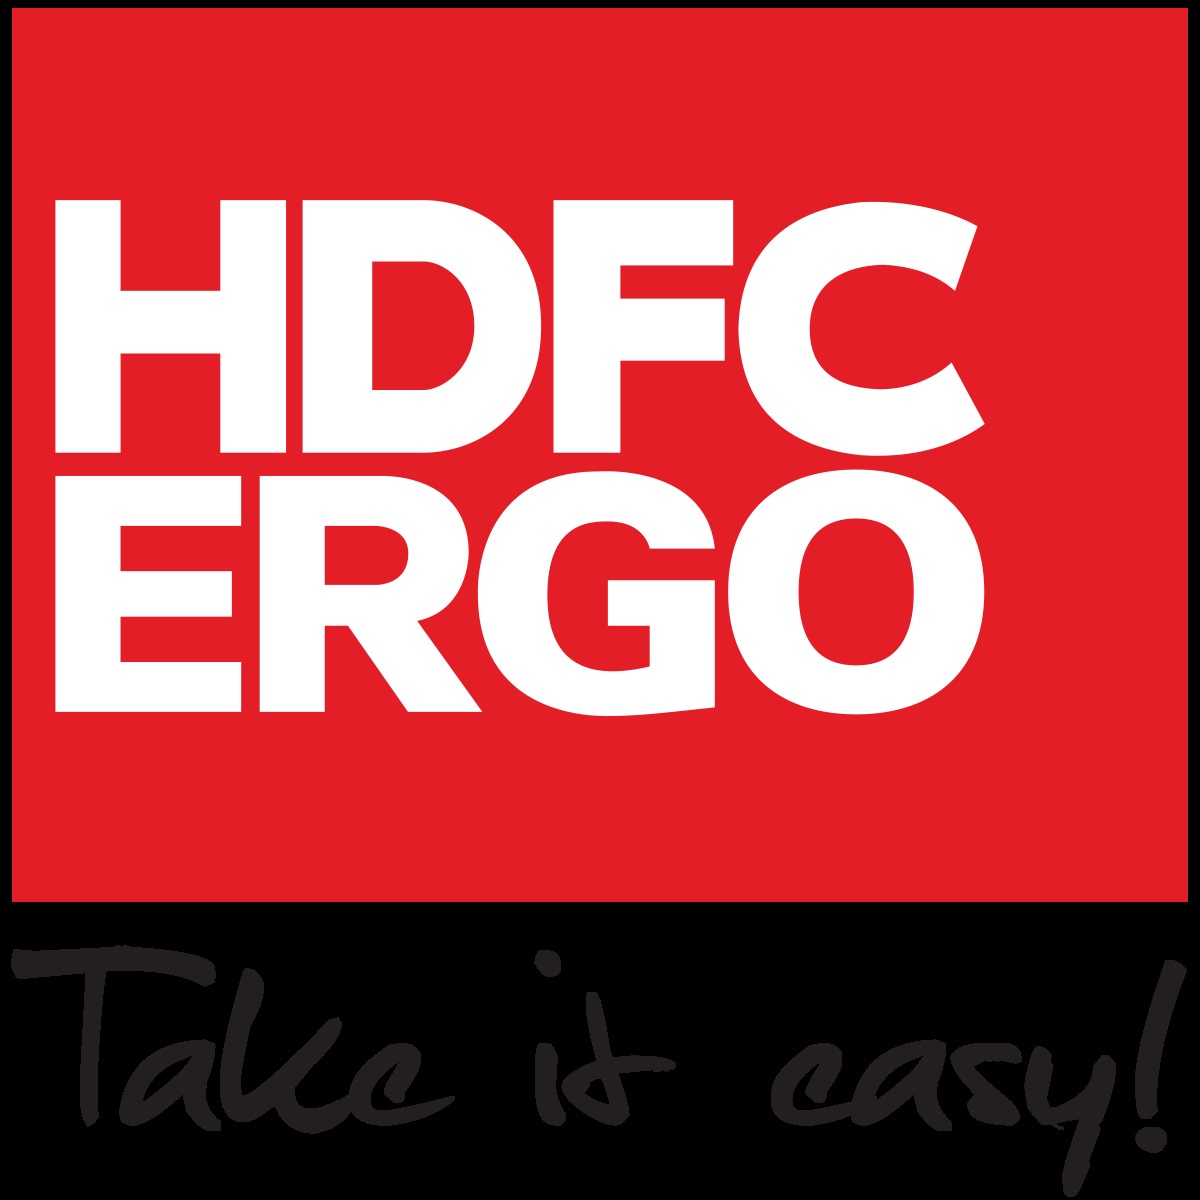 HDFC Ergo-Apollo Munich merger won't hurt existing policy contract